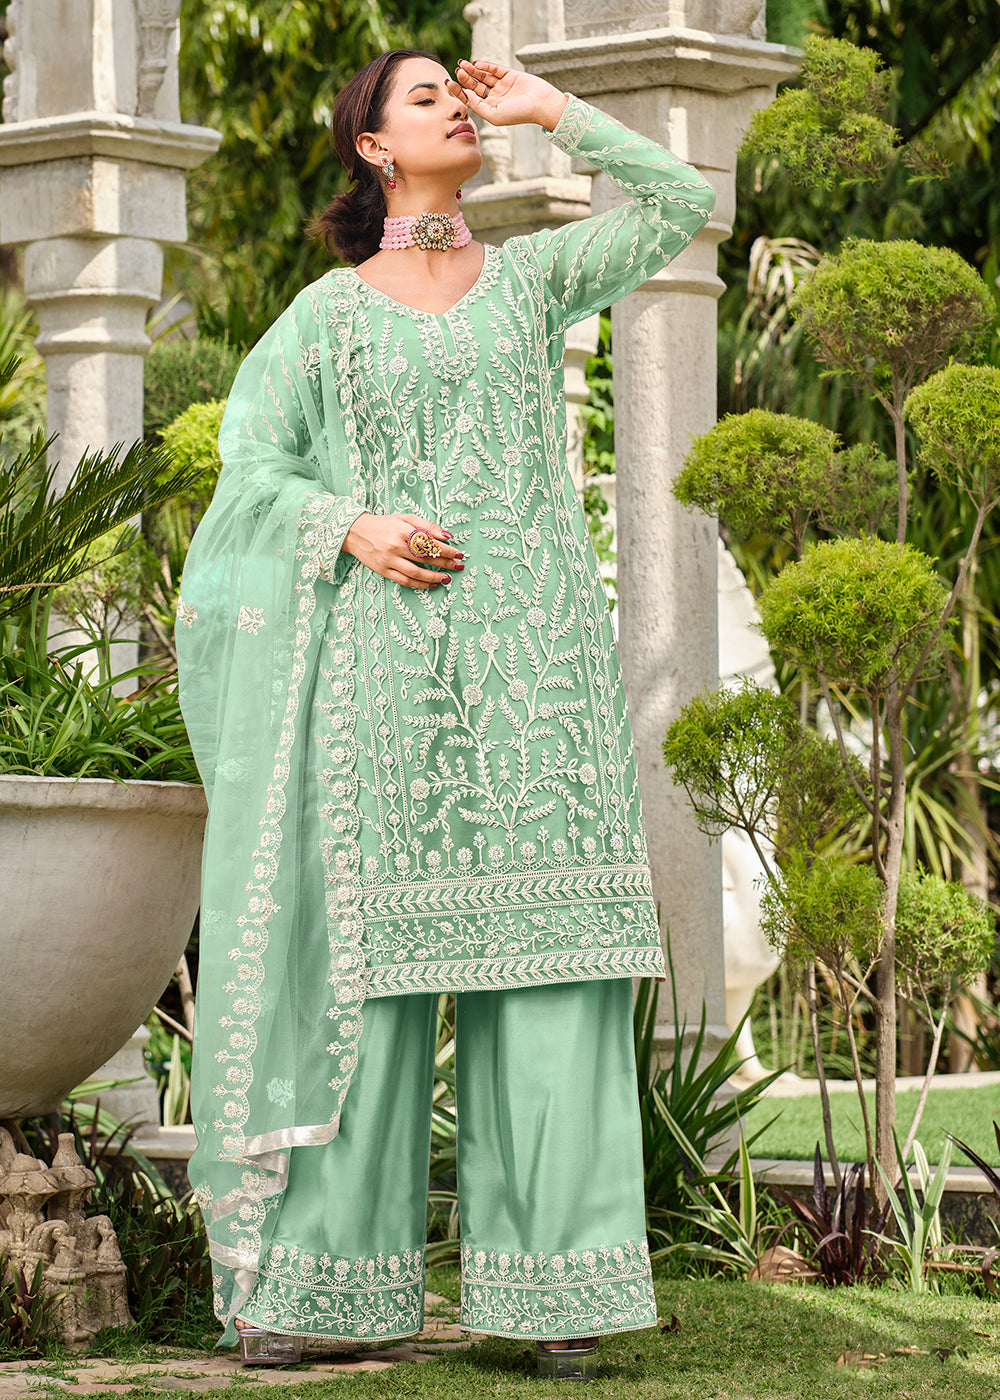 Buy Now Mint Green Stone & Cording Work Festive Palazzo Suit Online in USA, UK, Canada, Germany, Australia & Worldwide at Empress Clothing.